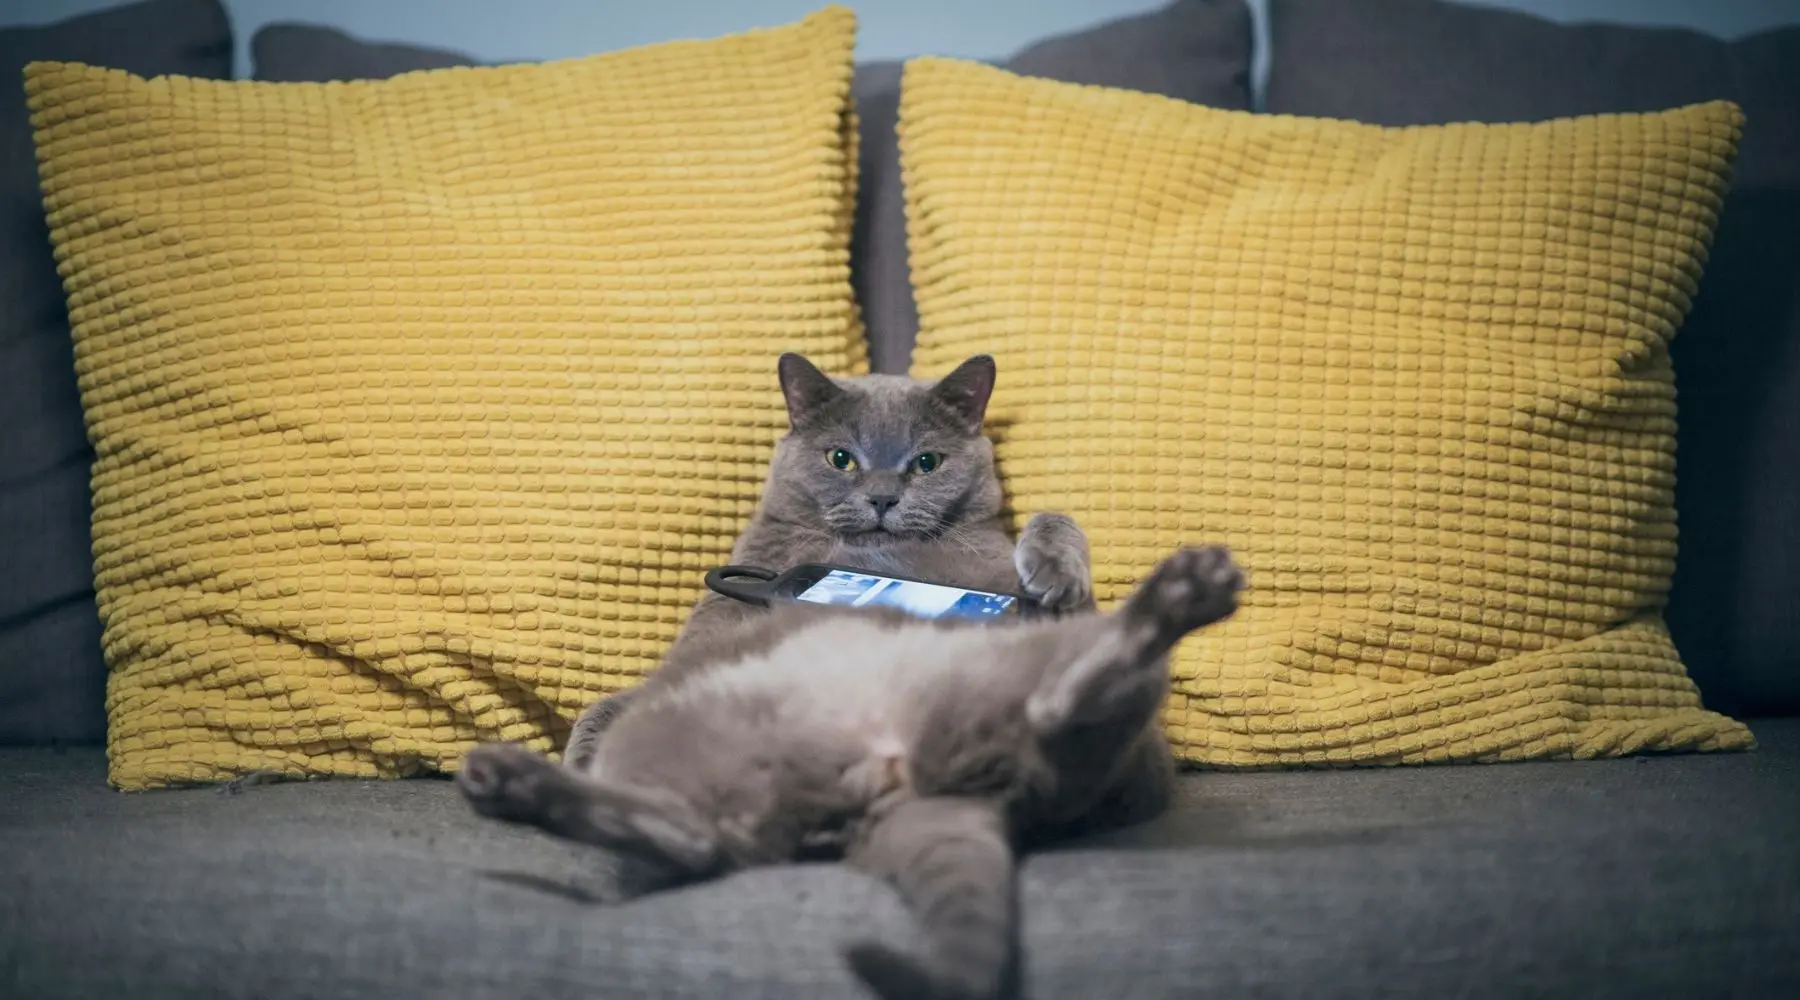 A lazy grey cat sits splayed on a sofa, with a phone on its stomach.